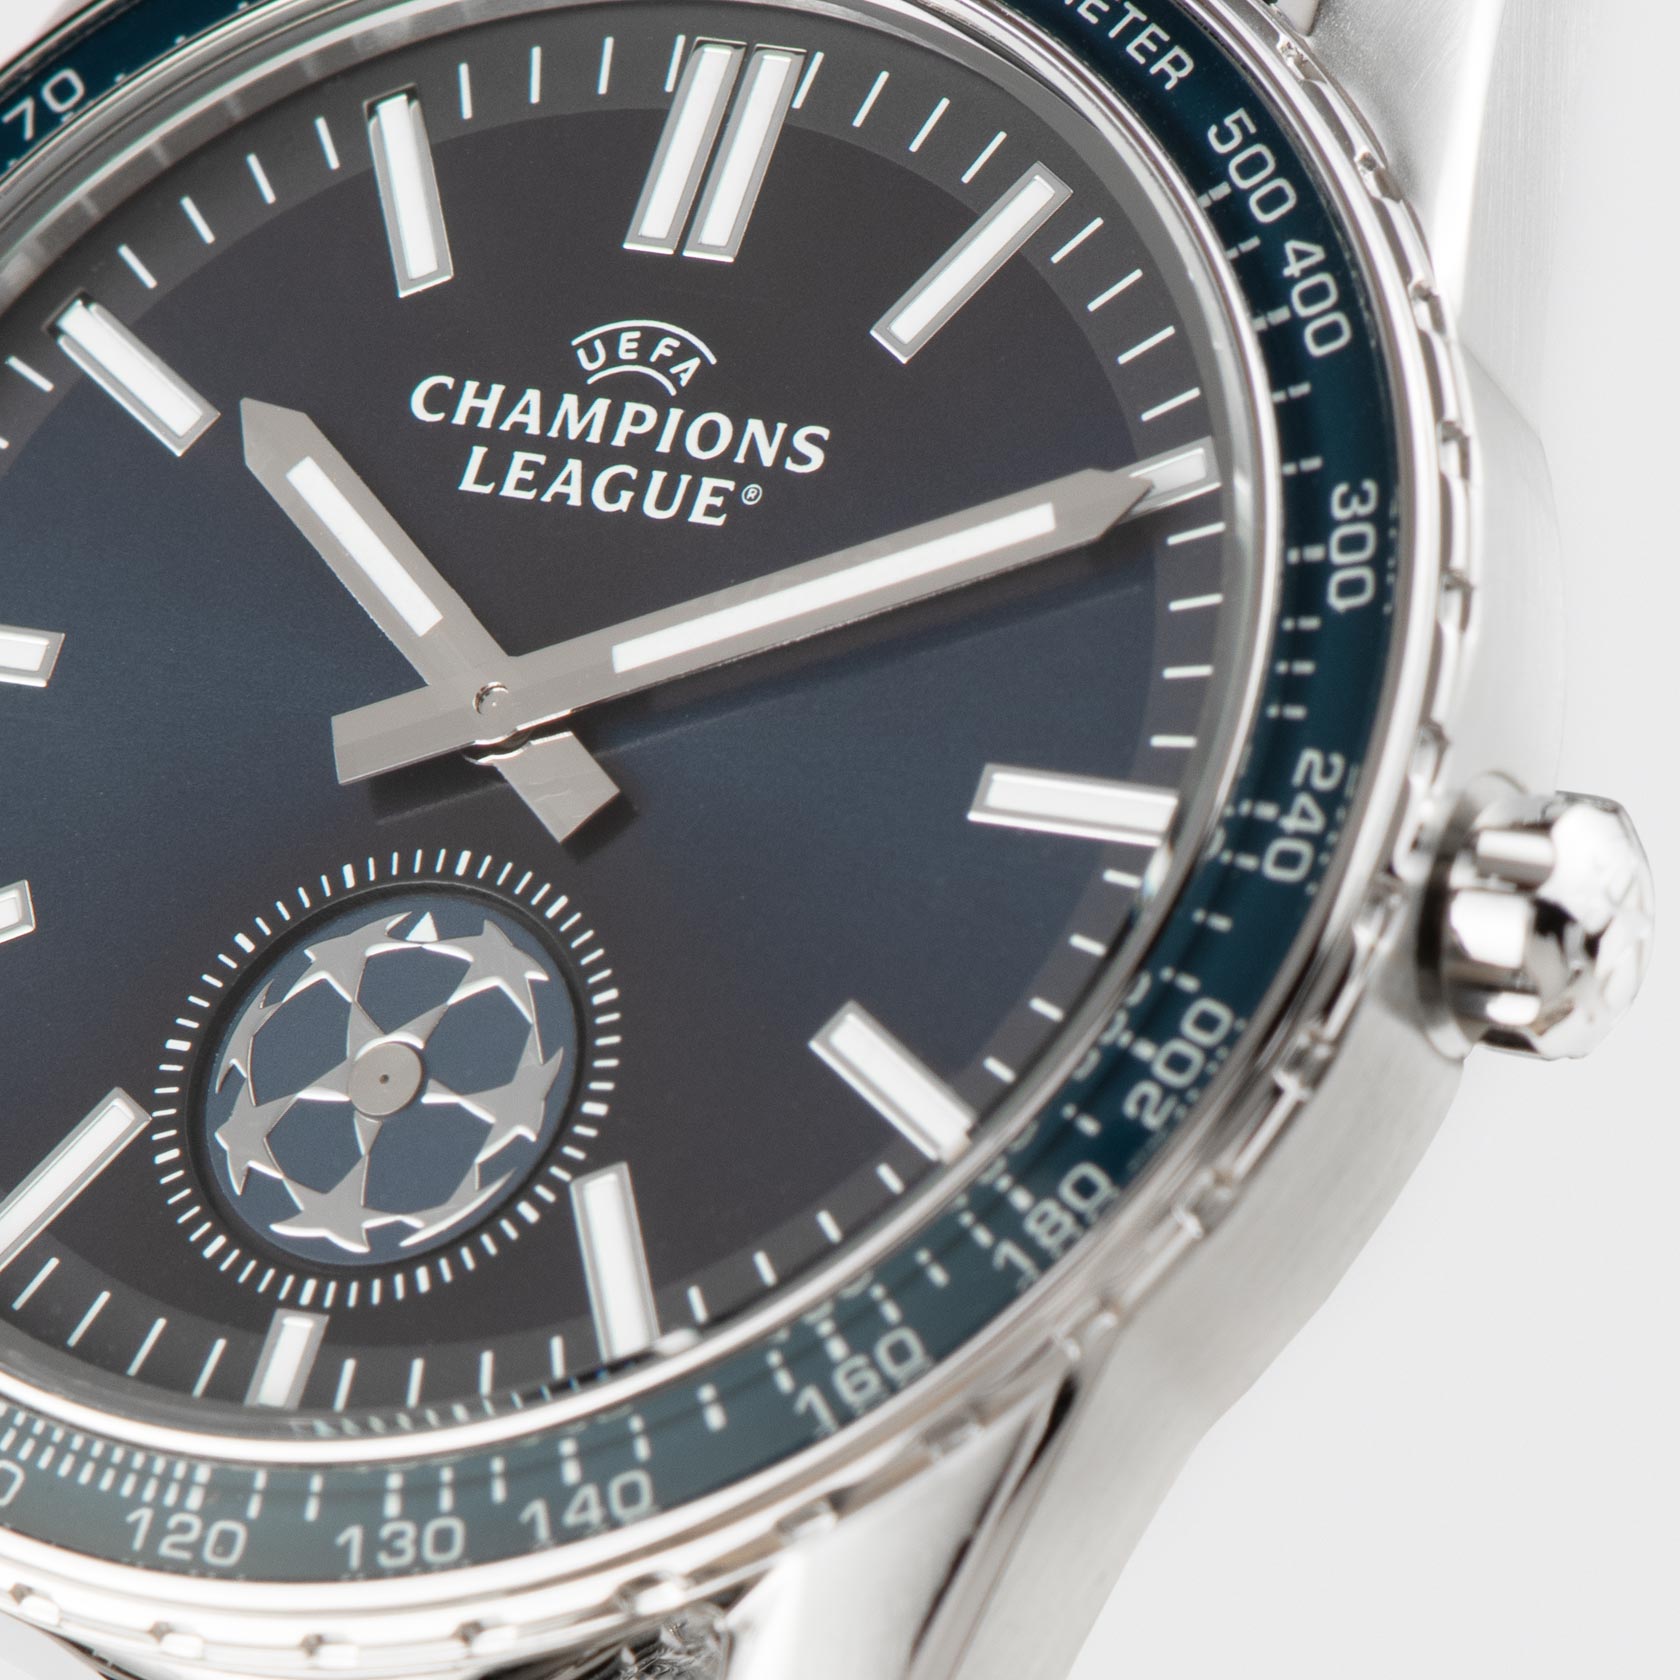 UCL Watch CL-101A Jacques Lemans Watch UEFA Club Competitions Online Store